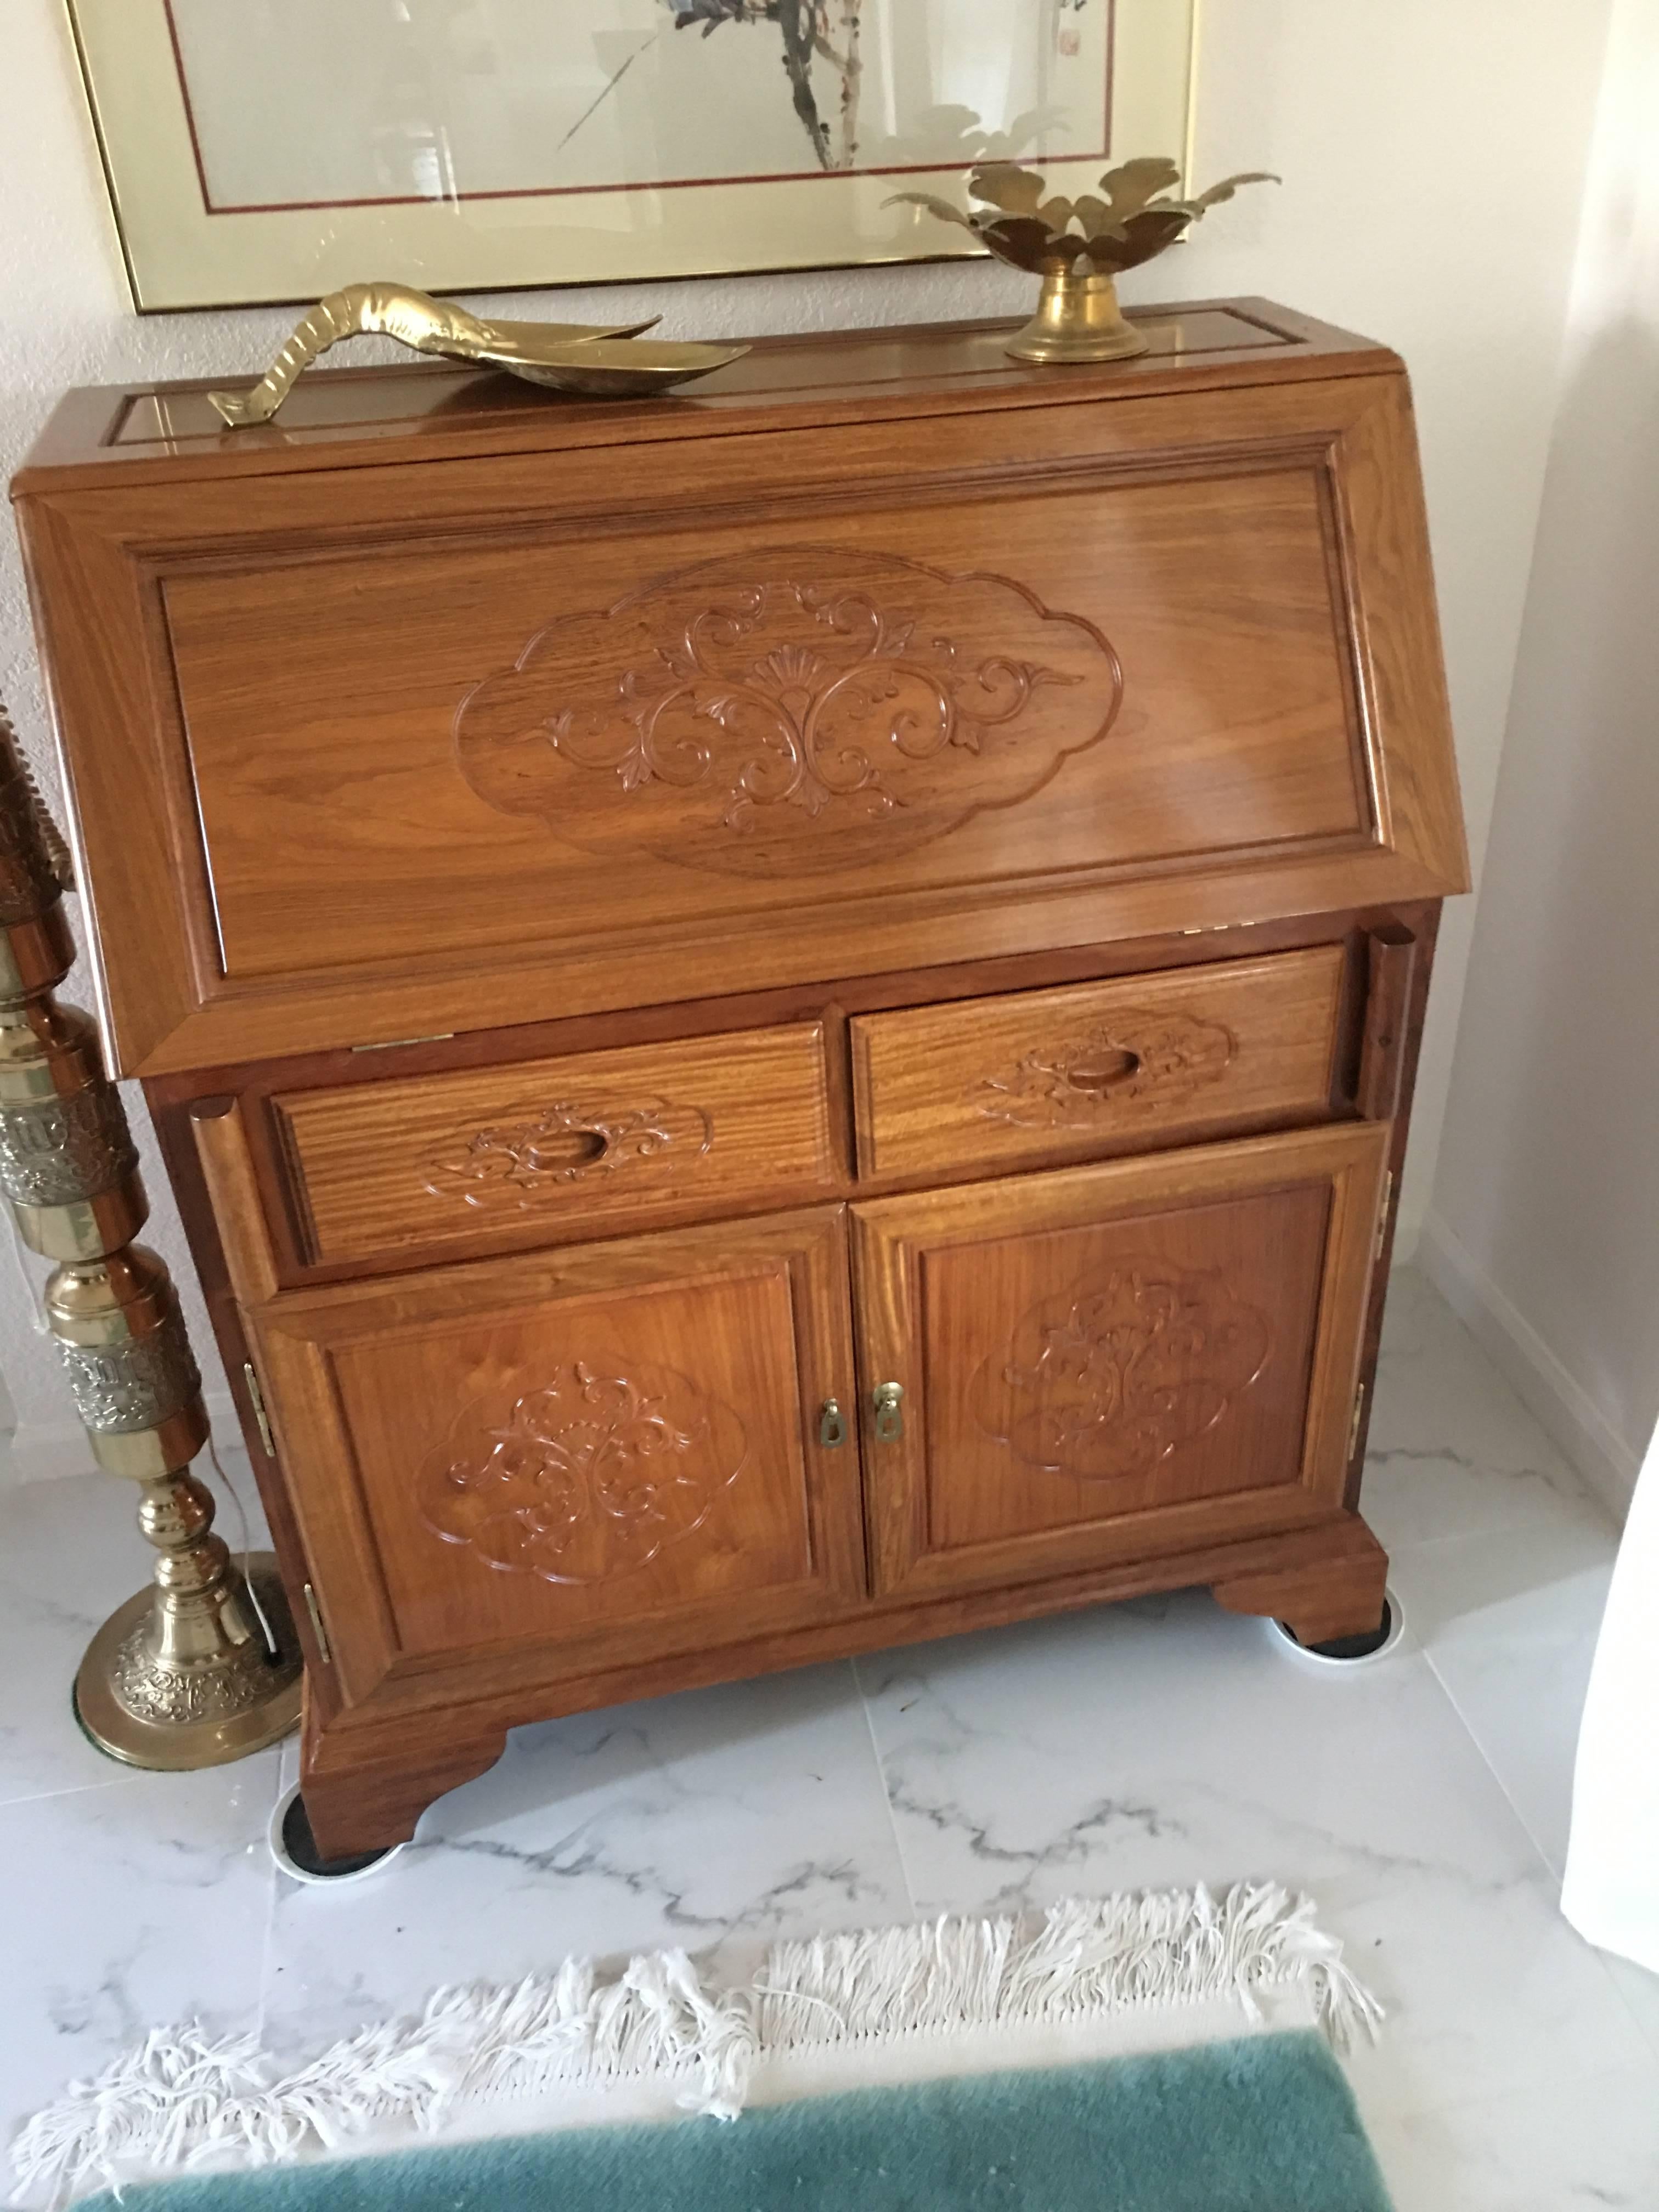 Rosewood writing desk with drop down front. 100% rosewood. No veneer in this piece, circa 1980. From Malaysia. Solid brass hardware. Golden dyed finish. Perfect condition. Absolutely no flaws. The drawer pulls have been carved into the drawer fronts